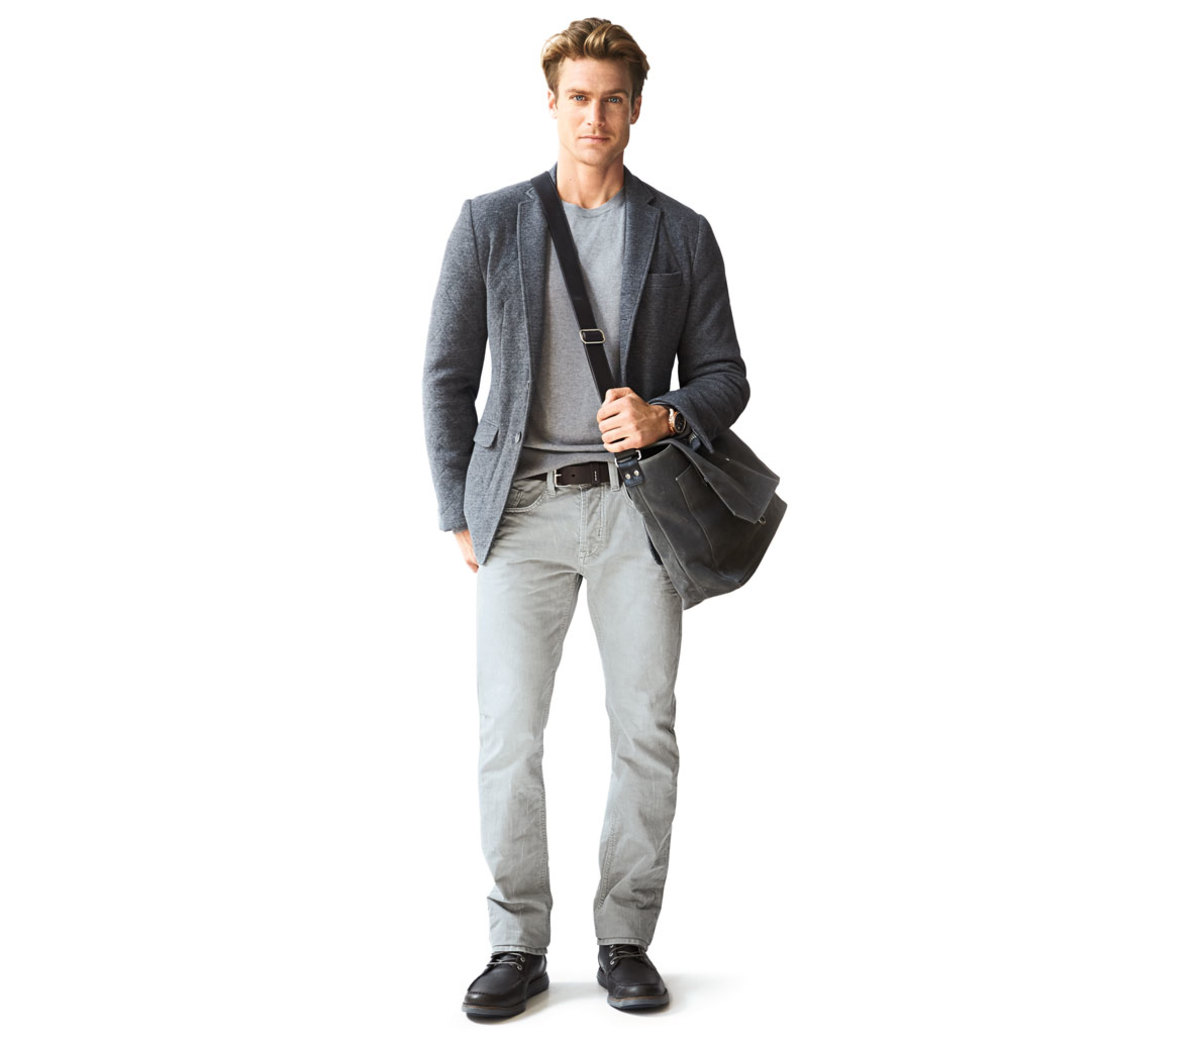 What to Wear on a Casual Friday? - Men's Journal